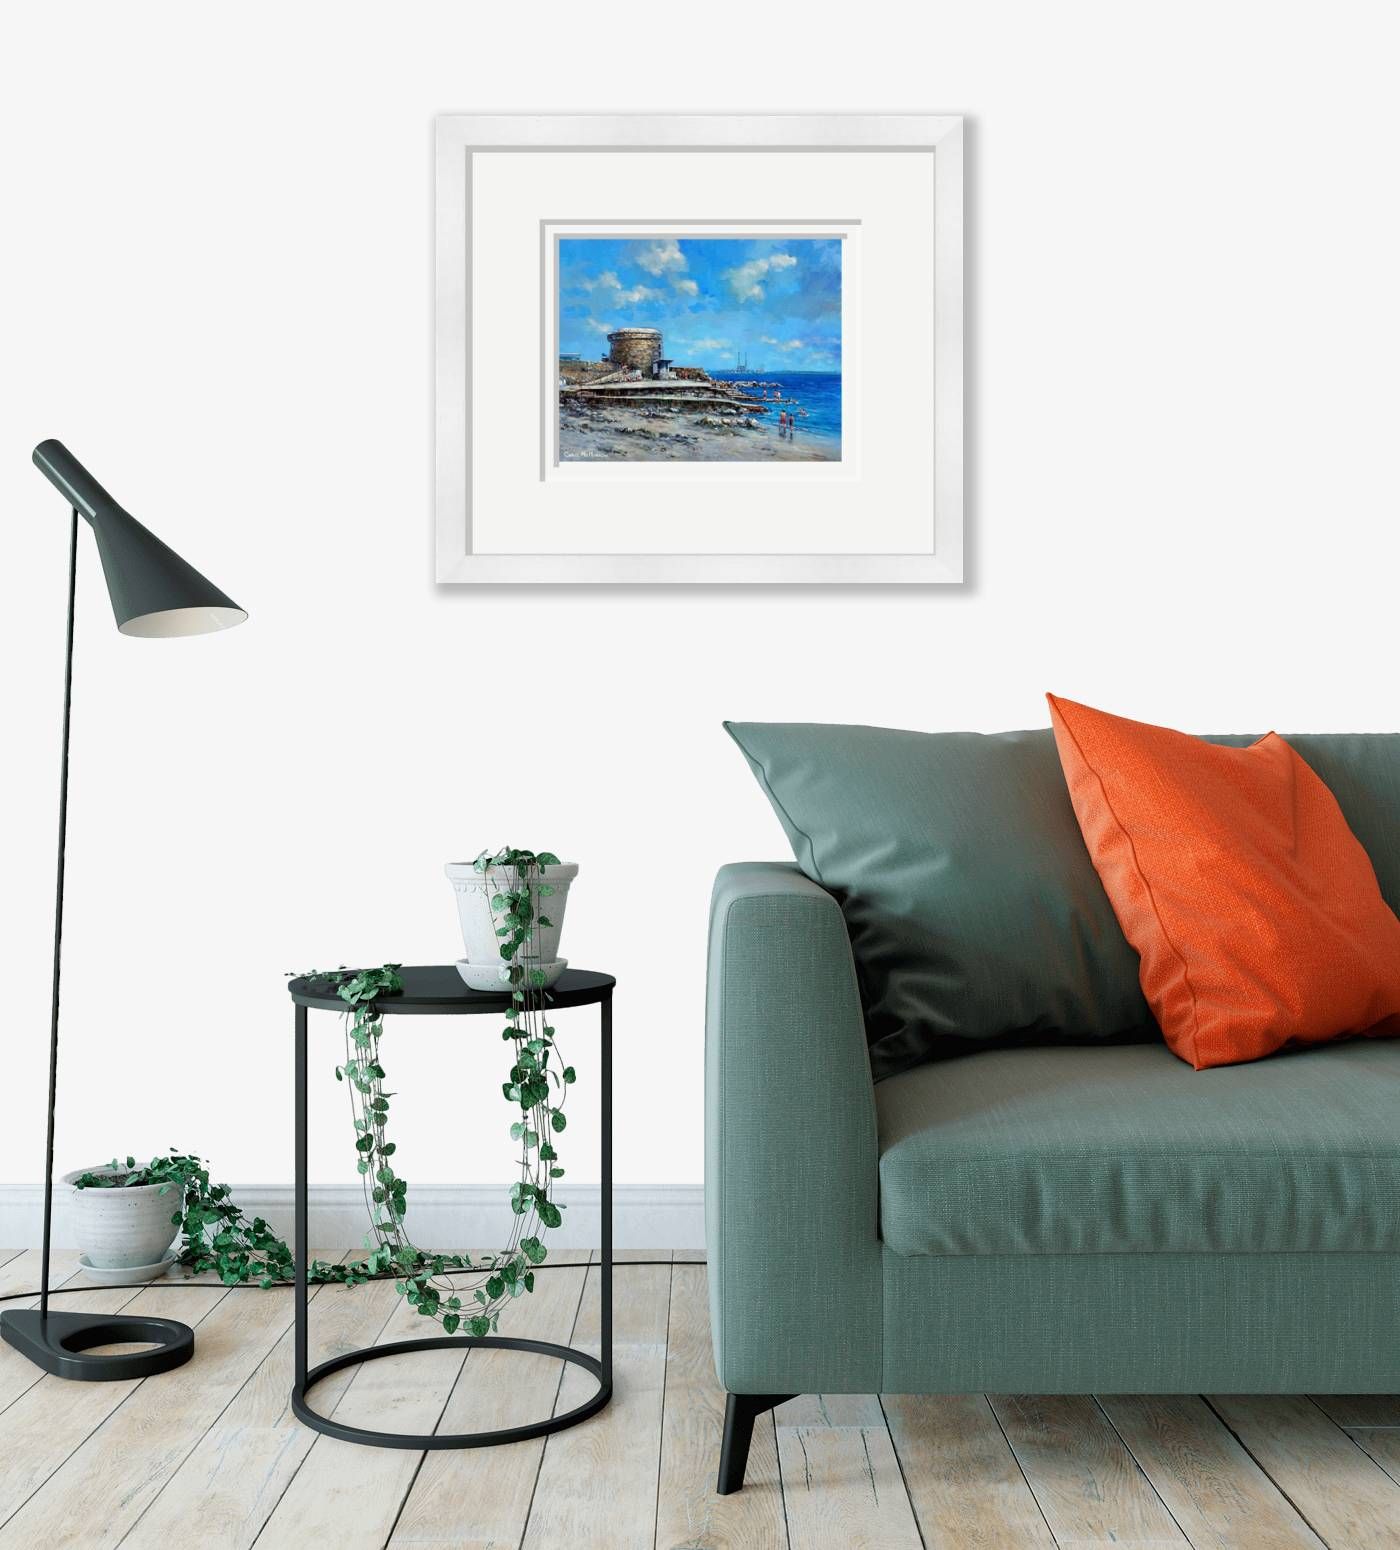 Large framed - Seapoint, Co Dublin - 292  by Chris McMorrow